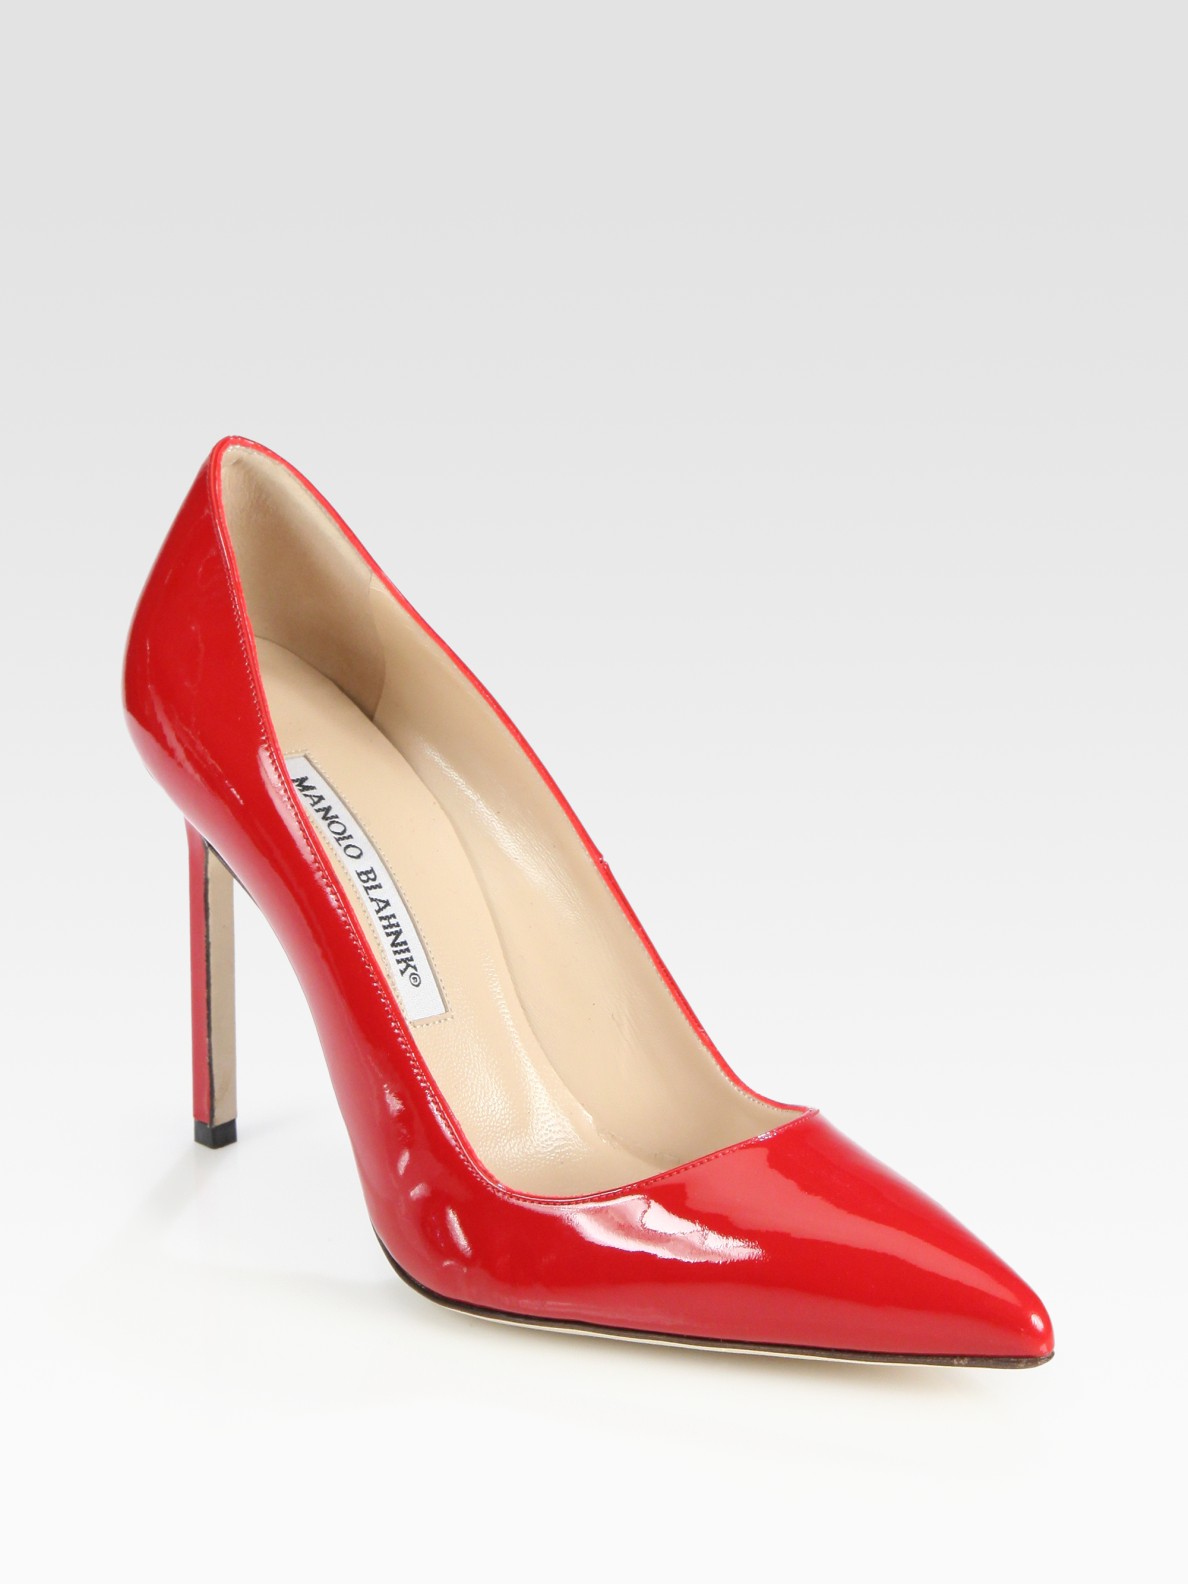 Lyst - Manolo Blahnik Bb Patent Leather Point Toe Pumps in Red